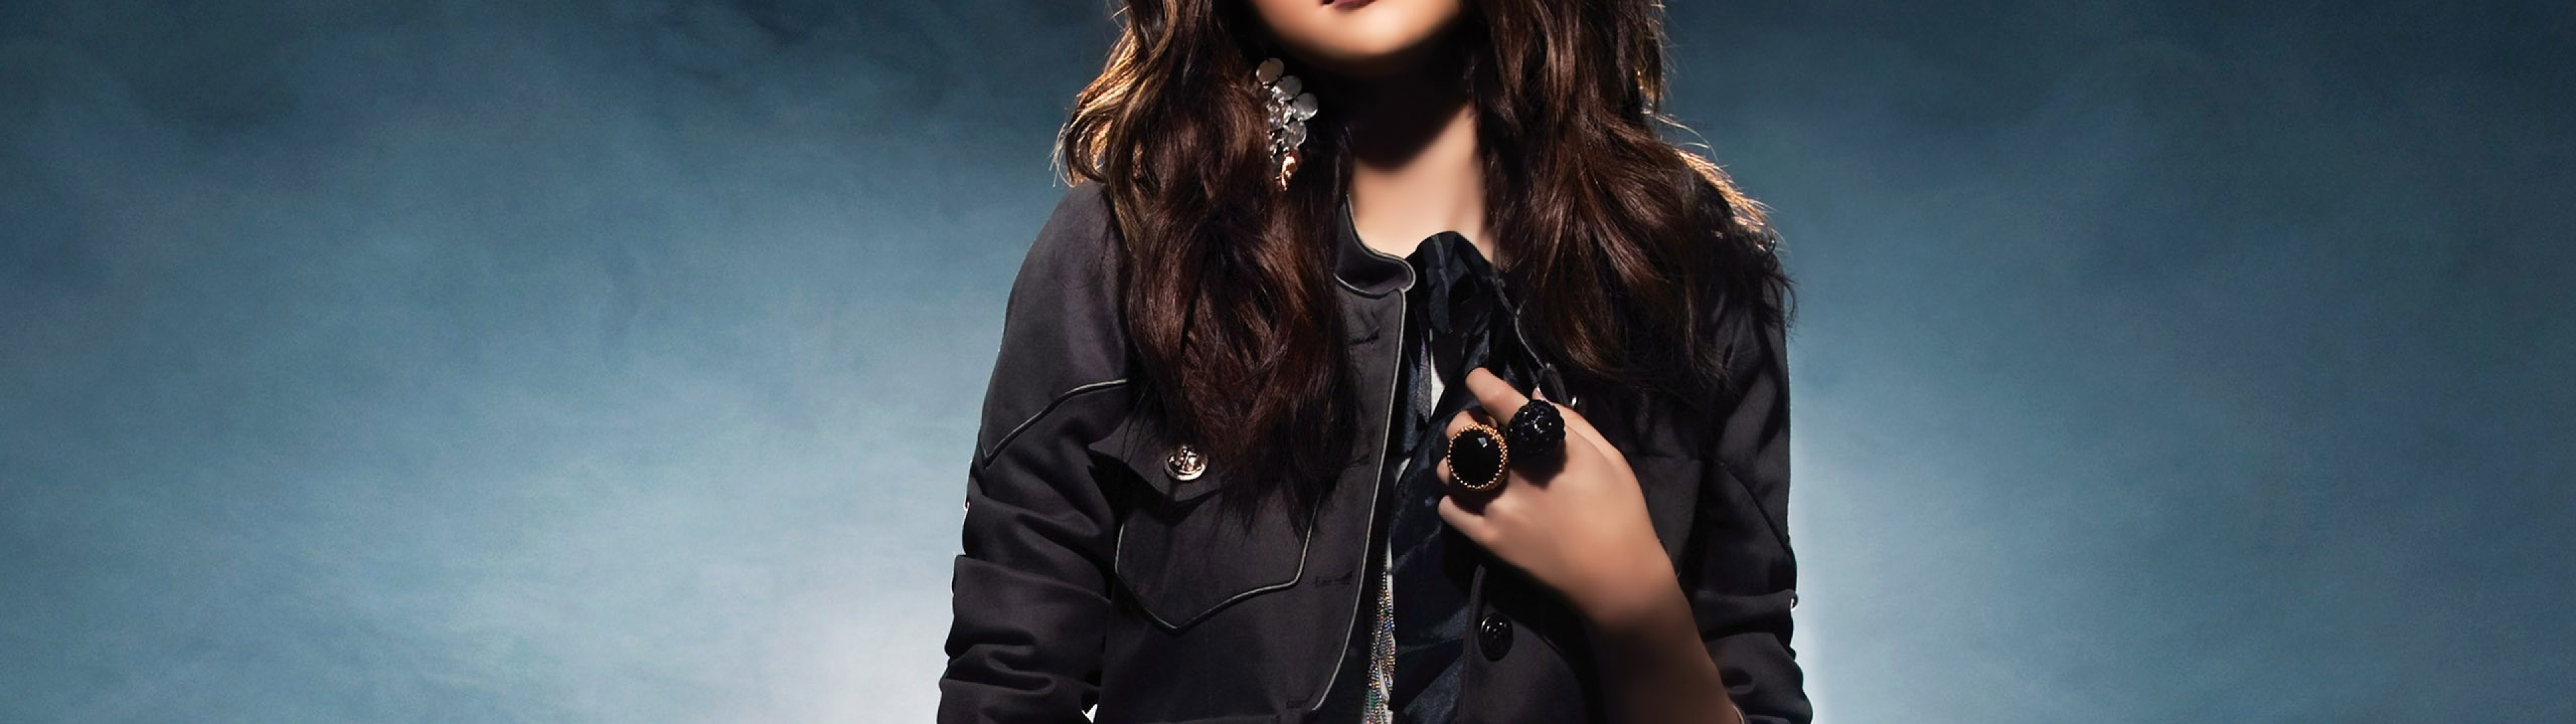 3840x1080 Resolution Selena Gomez images download 3840x1080 Resolution ...